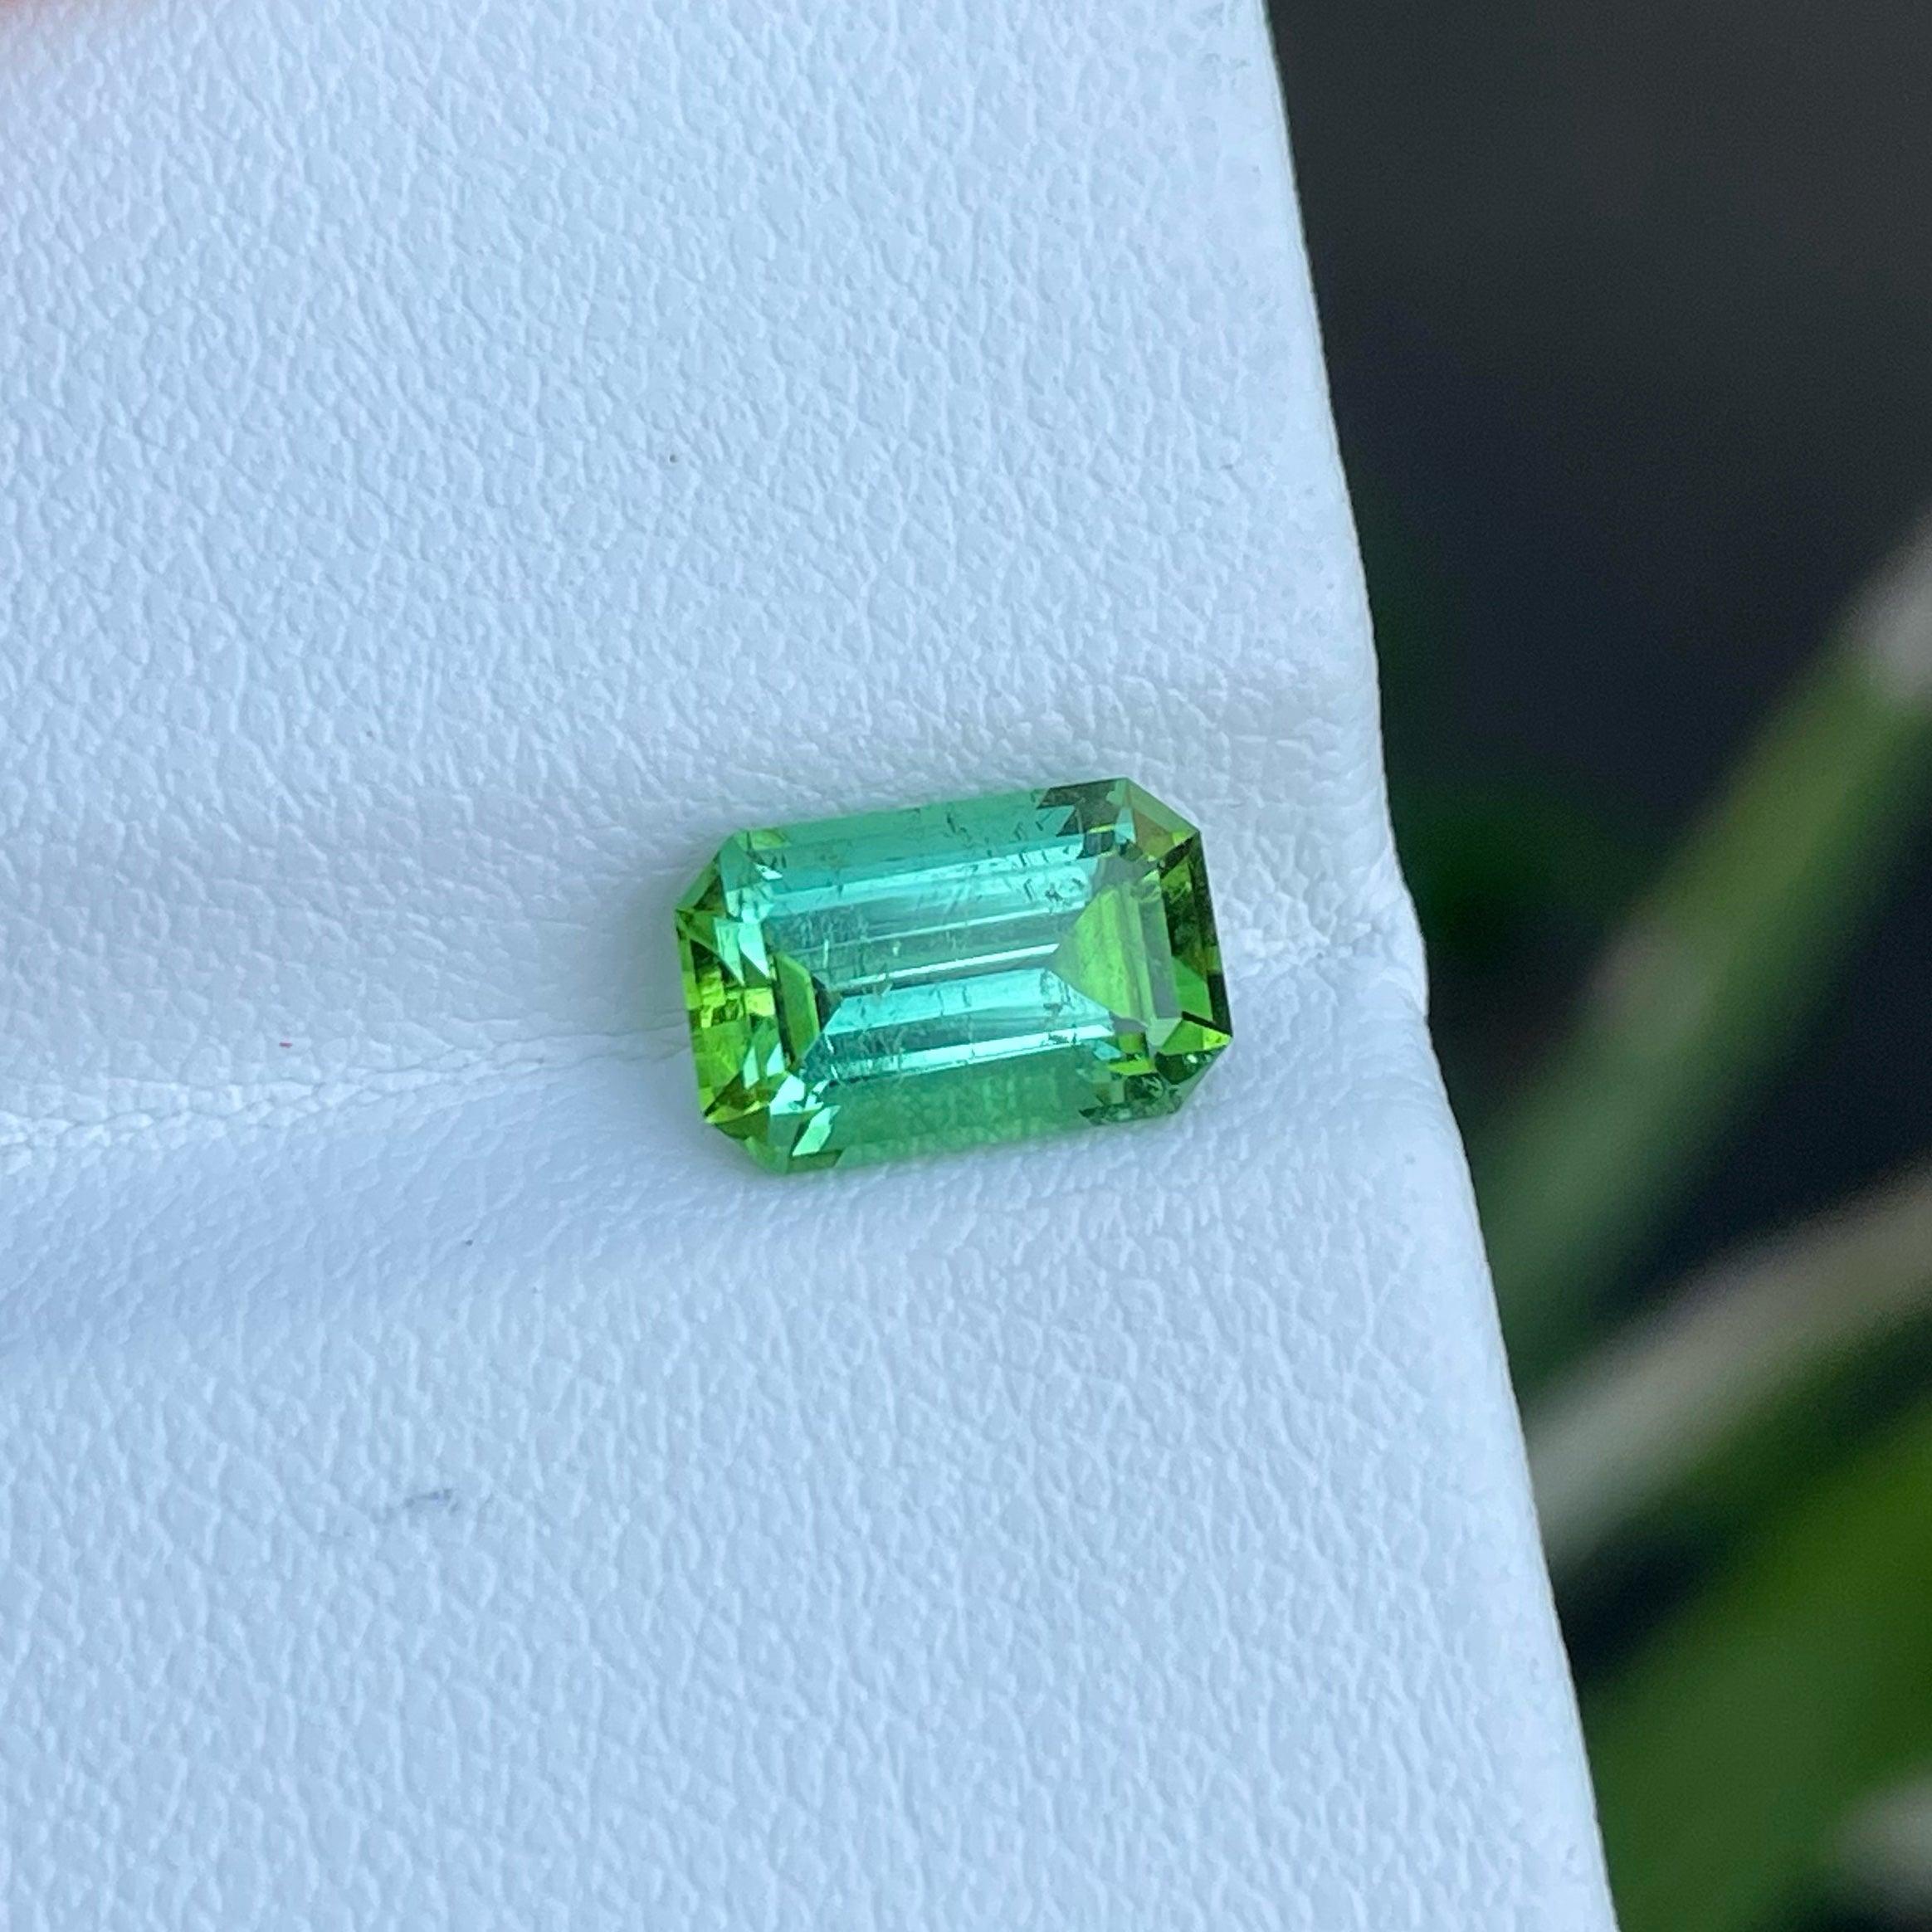 Beautiful Natural Mint Green Tourmaline, Available For Sale At Wholesale Price Natural High Quality 2.45 Carats SI Clarity Untreated Tourmaline From Afghanistan.

Product Information:
GEMSTONE TYPE:	Beautiful Natural Mint Green